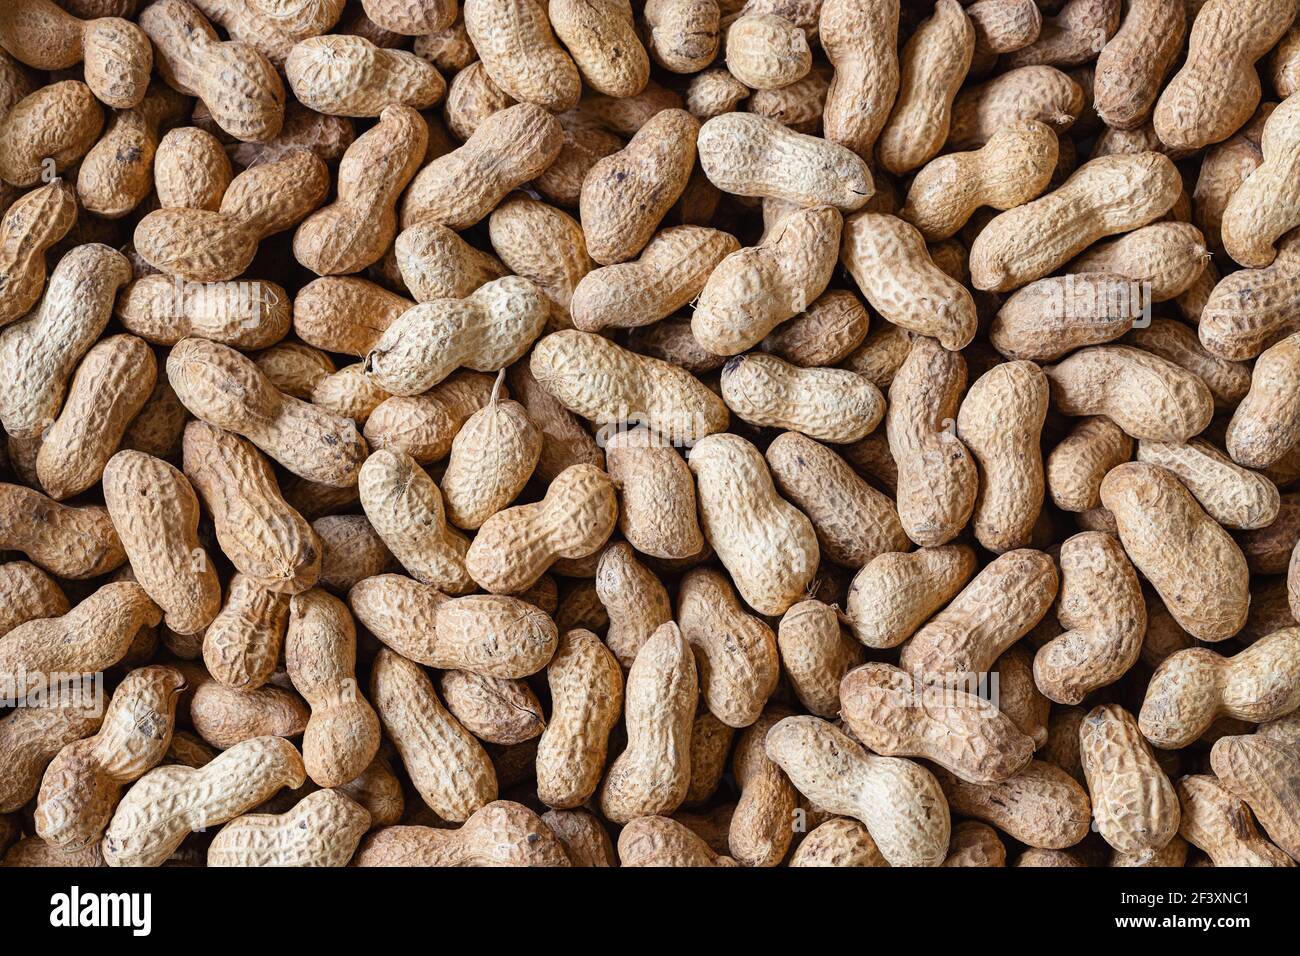 Background of roasted peanuts in shell. Stock Photo